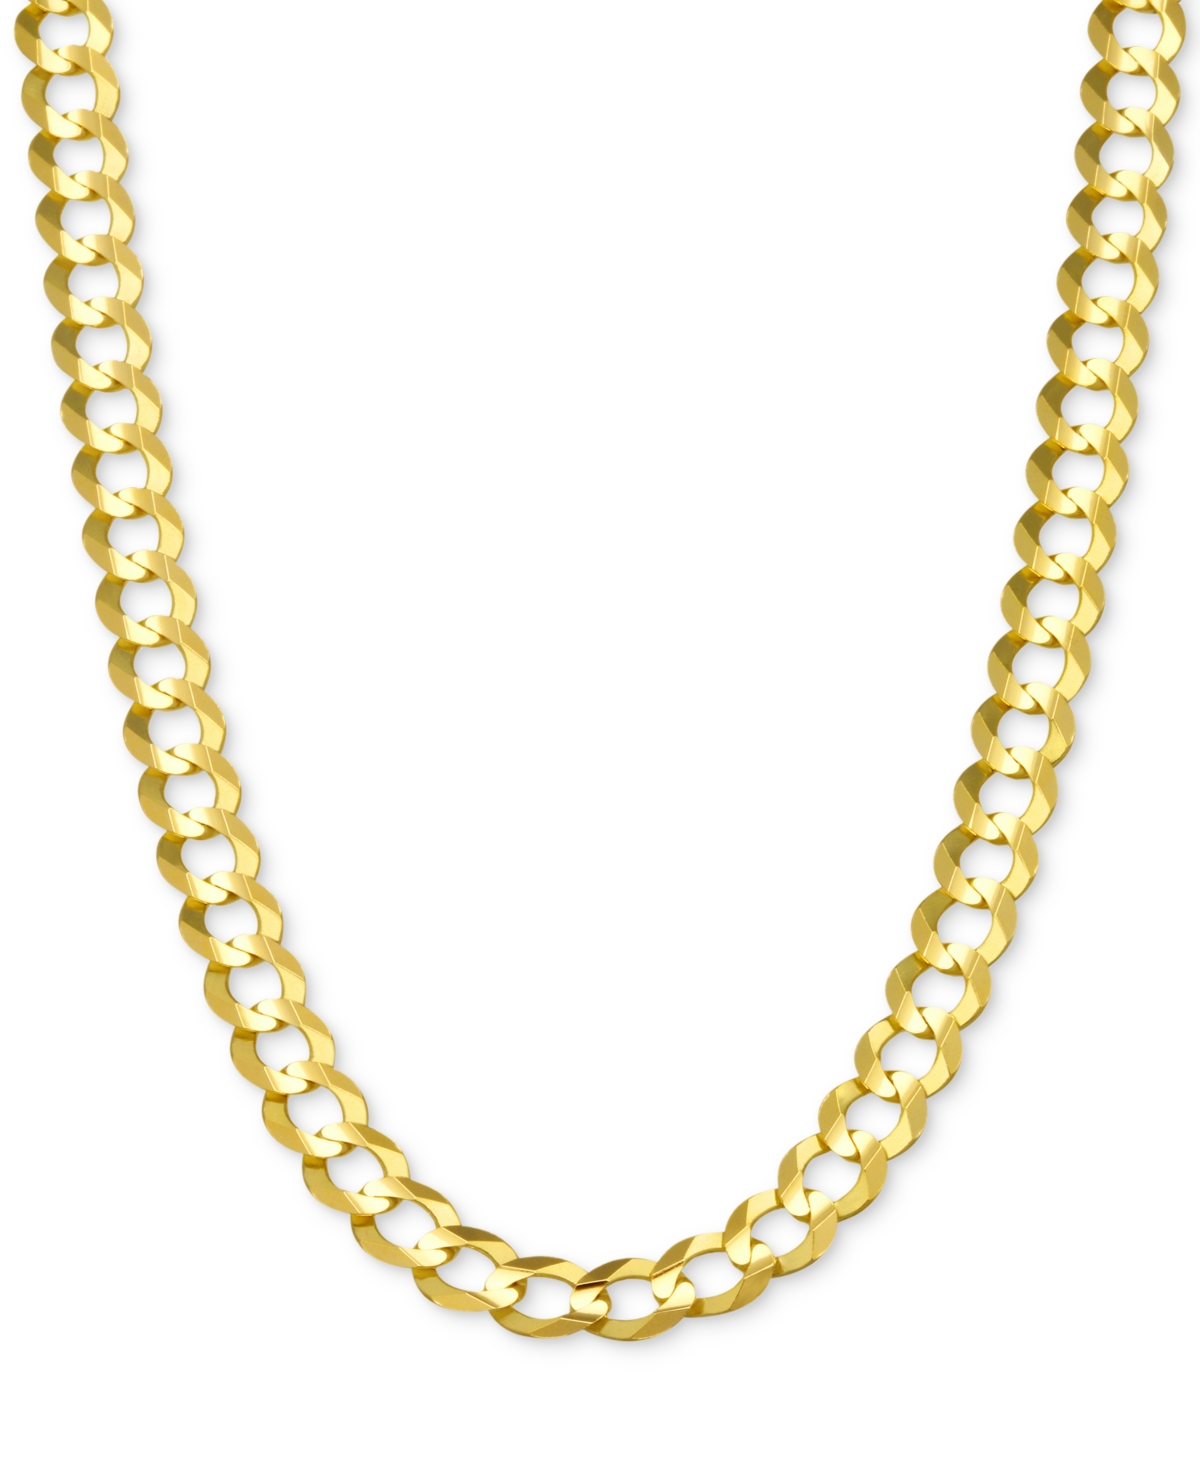 24" Open Curb Link Chain Necklace in Solid 14k Gold - Gold